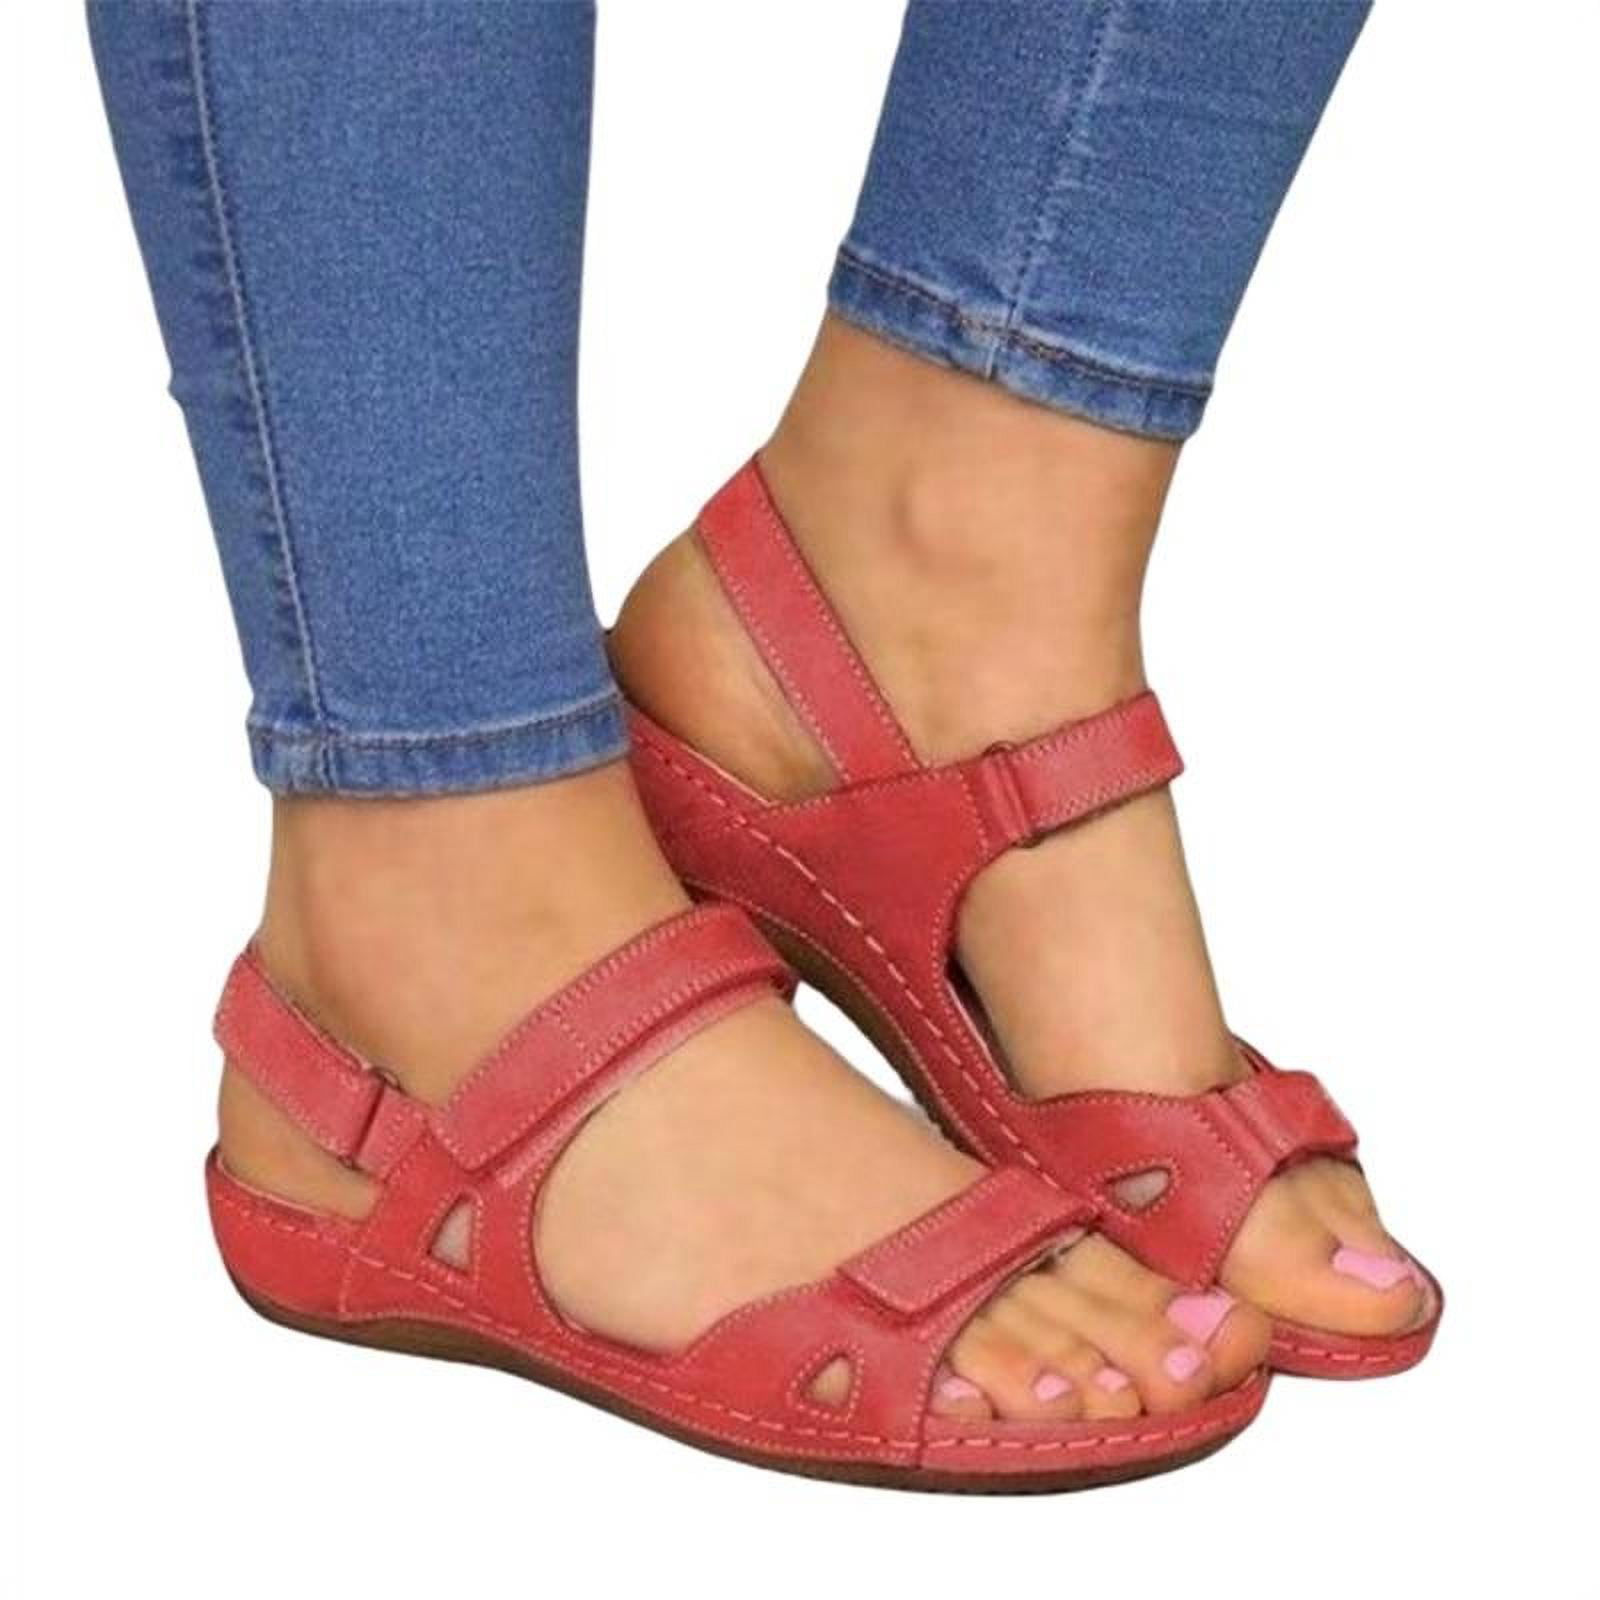 Womens Sandals for Women with Arch Support Shoes Wedge Massage Function Adjustable Ladies Casual Platform Open Toes Slides